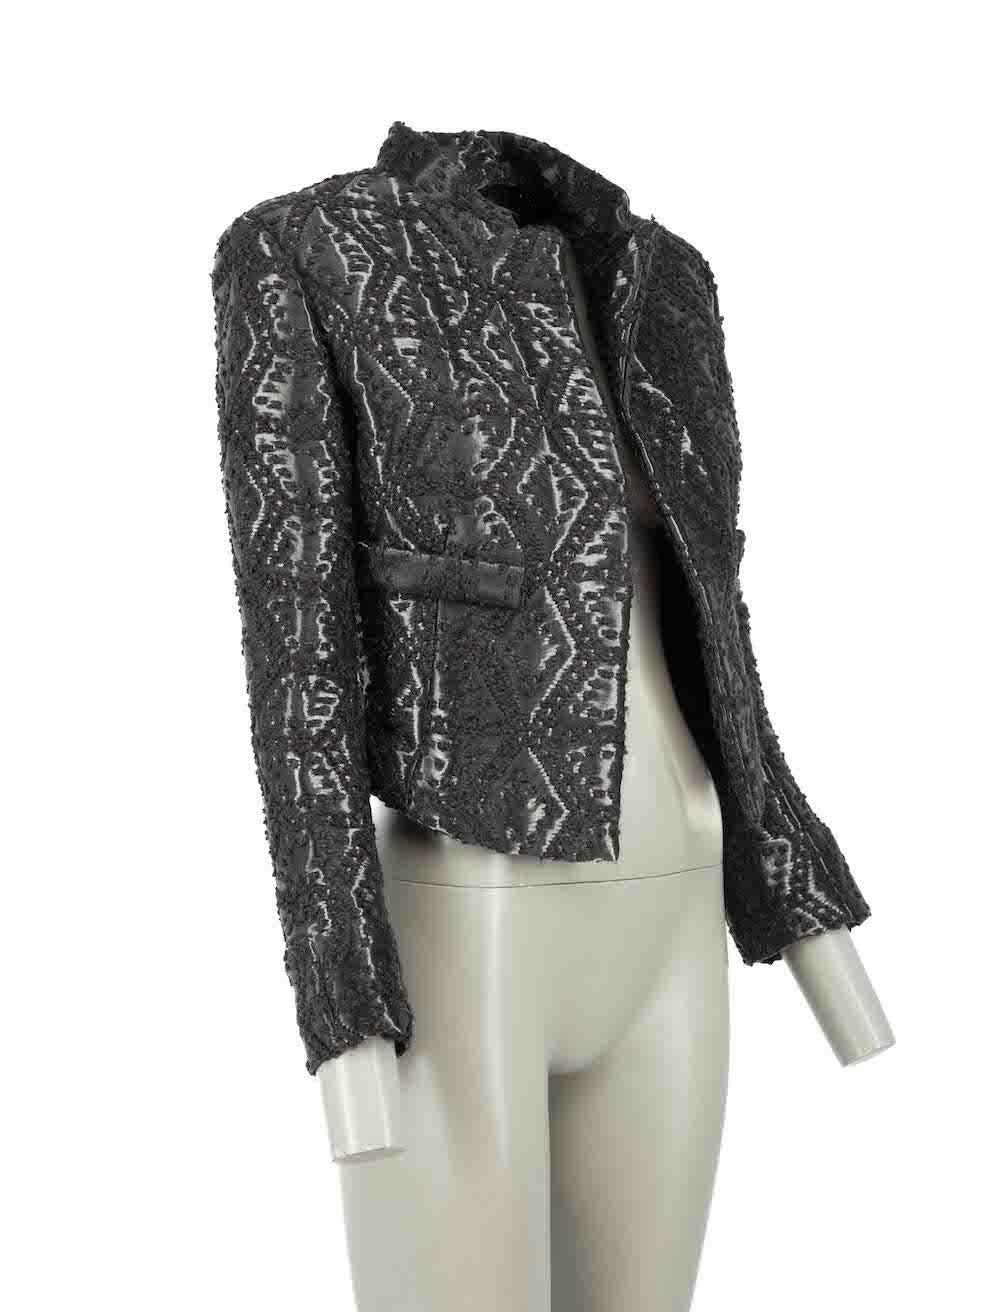 CONDITION is Very good. Minimal wear to jacket is evident. Minimal wear with the size label having been removed on this used Fendi designer resale item.

Details
AW11
Metallic grey
Synthetic
Blazer
Cropped length
Geometric woven accent
Open front
2x